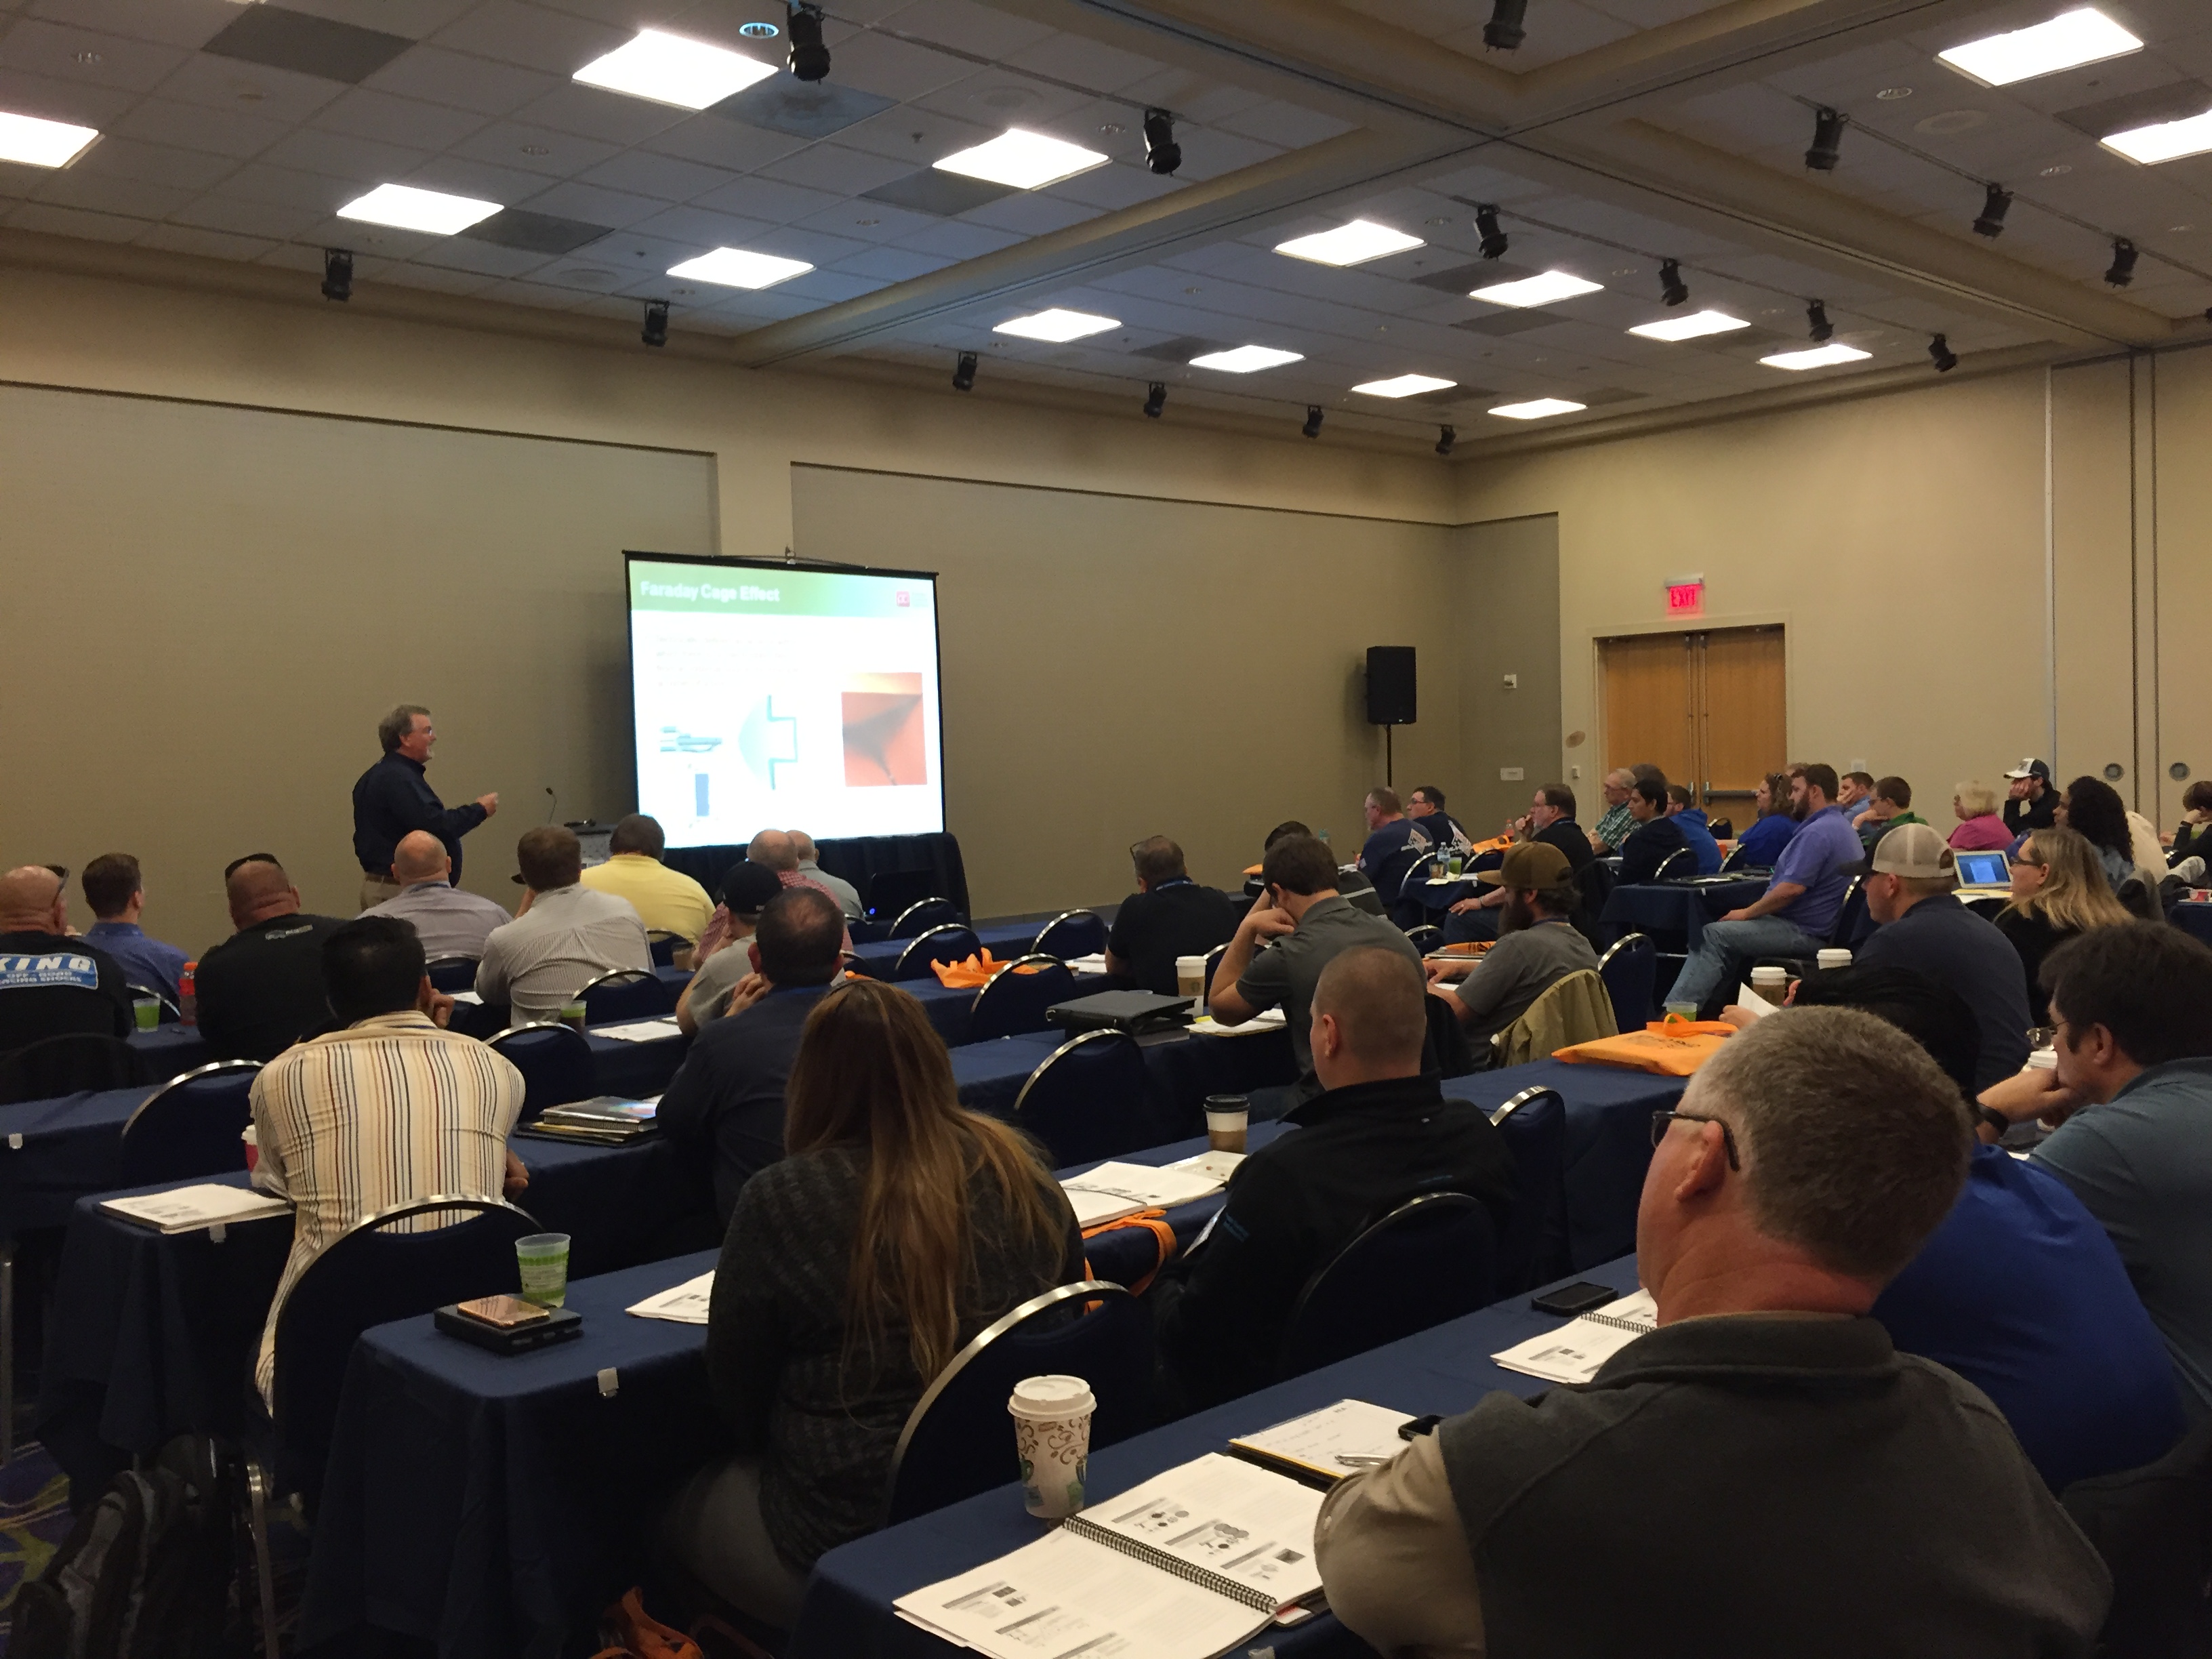 Attendees get the most current powder coating information from industry professionals.